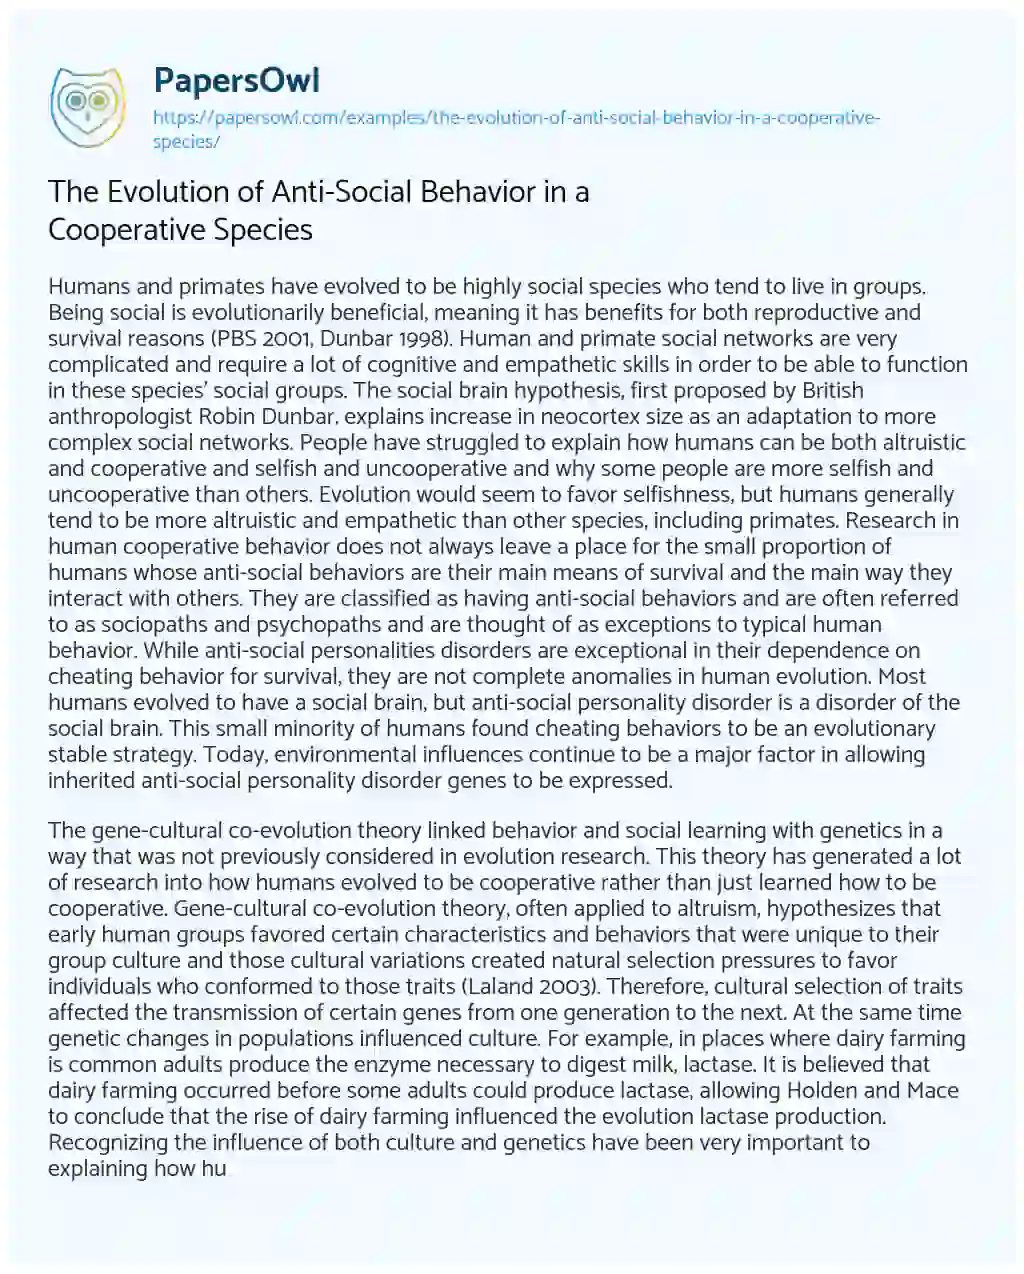 Essay on The Evolution of Anti-Social Behavior in a Cooperative Species